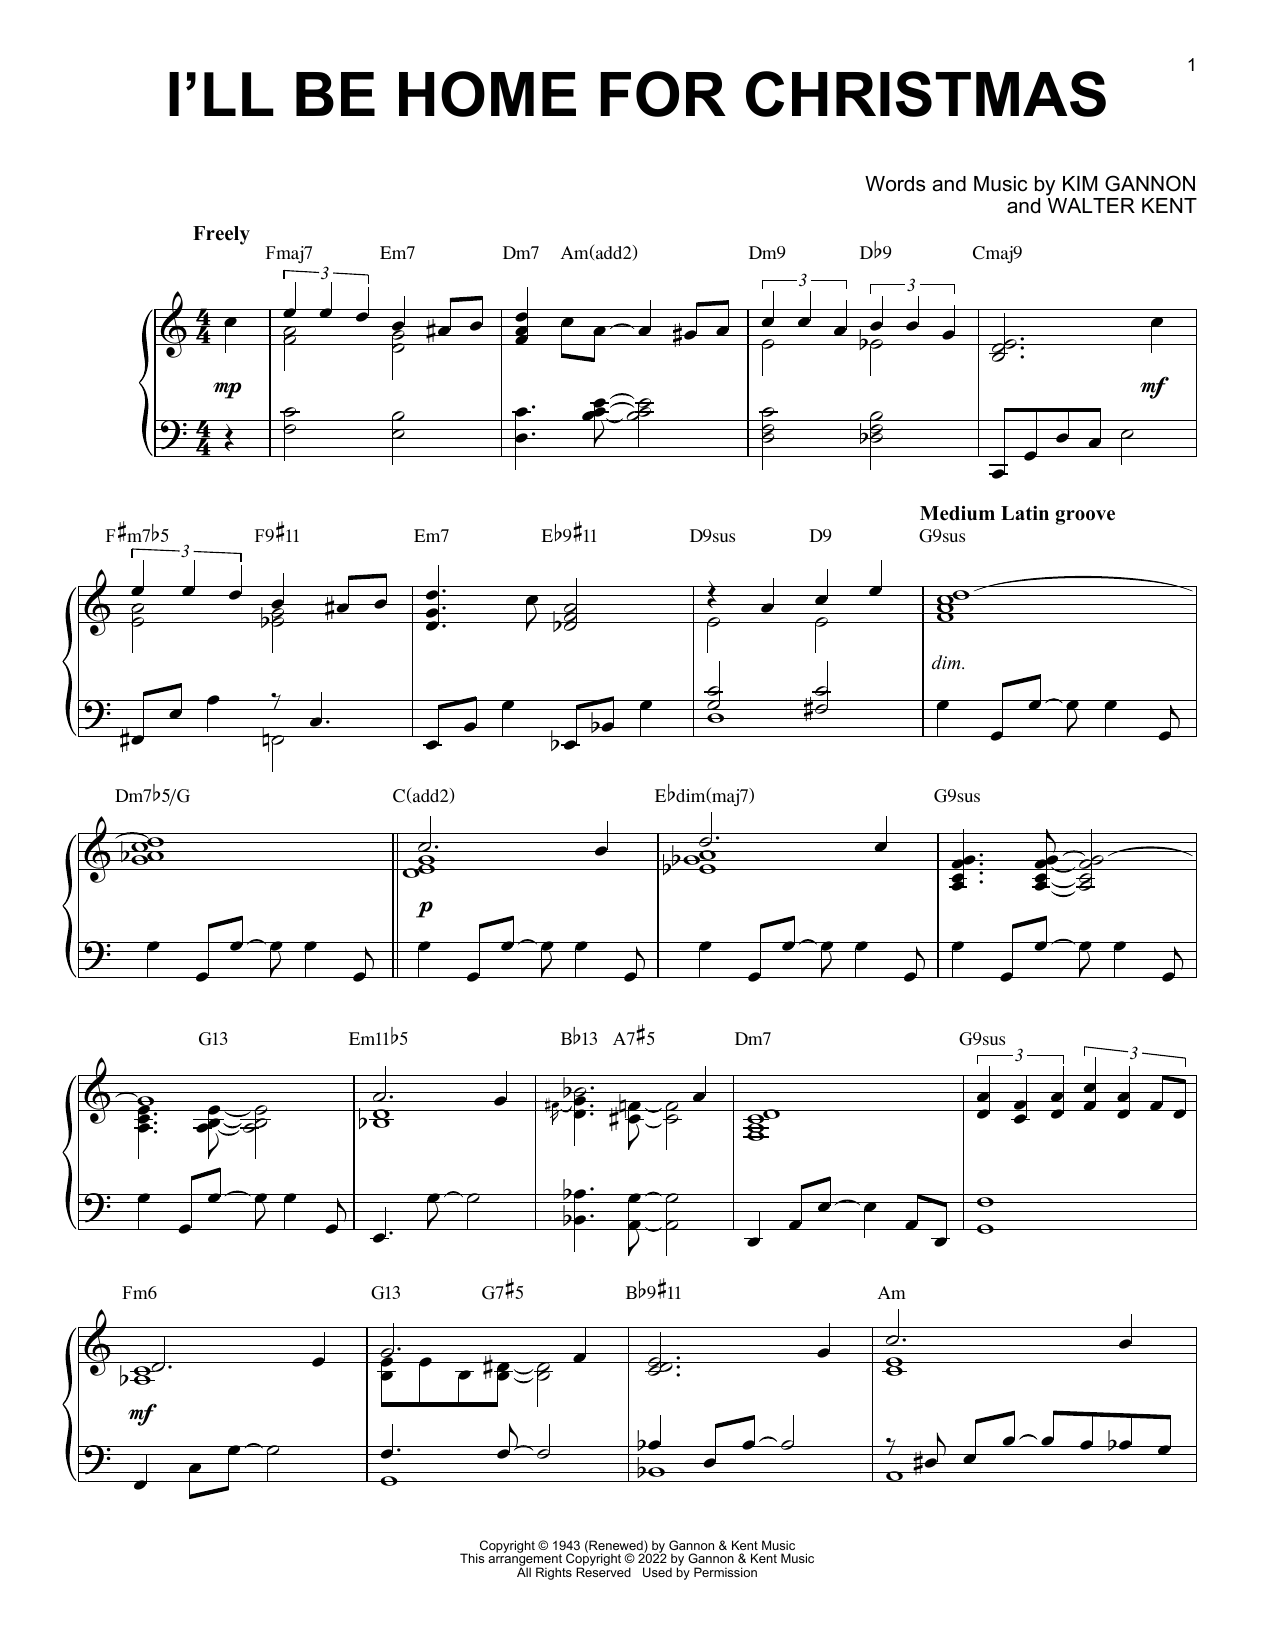 Bing Crosby I'll Be Home For Christmas (arr. Brent Edstrom) sheet music notes and chords. Download Printable PDF.